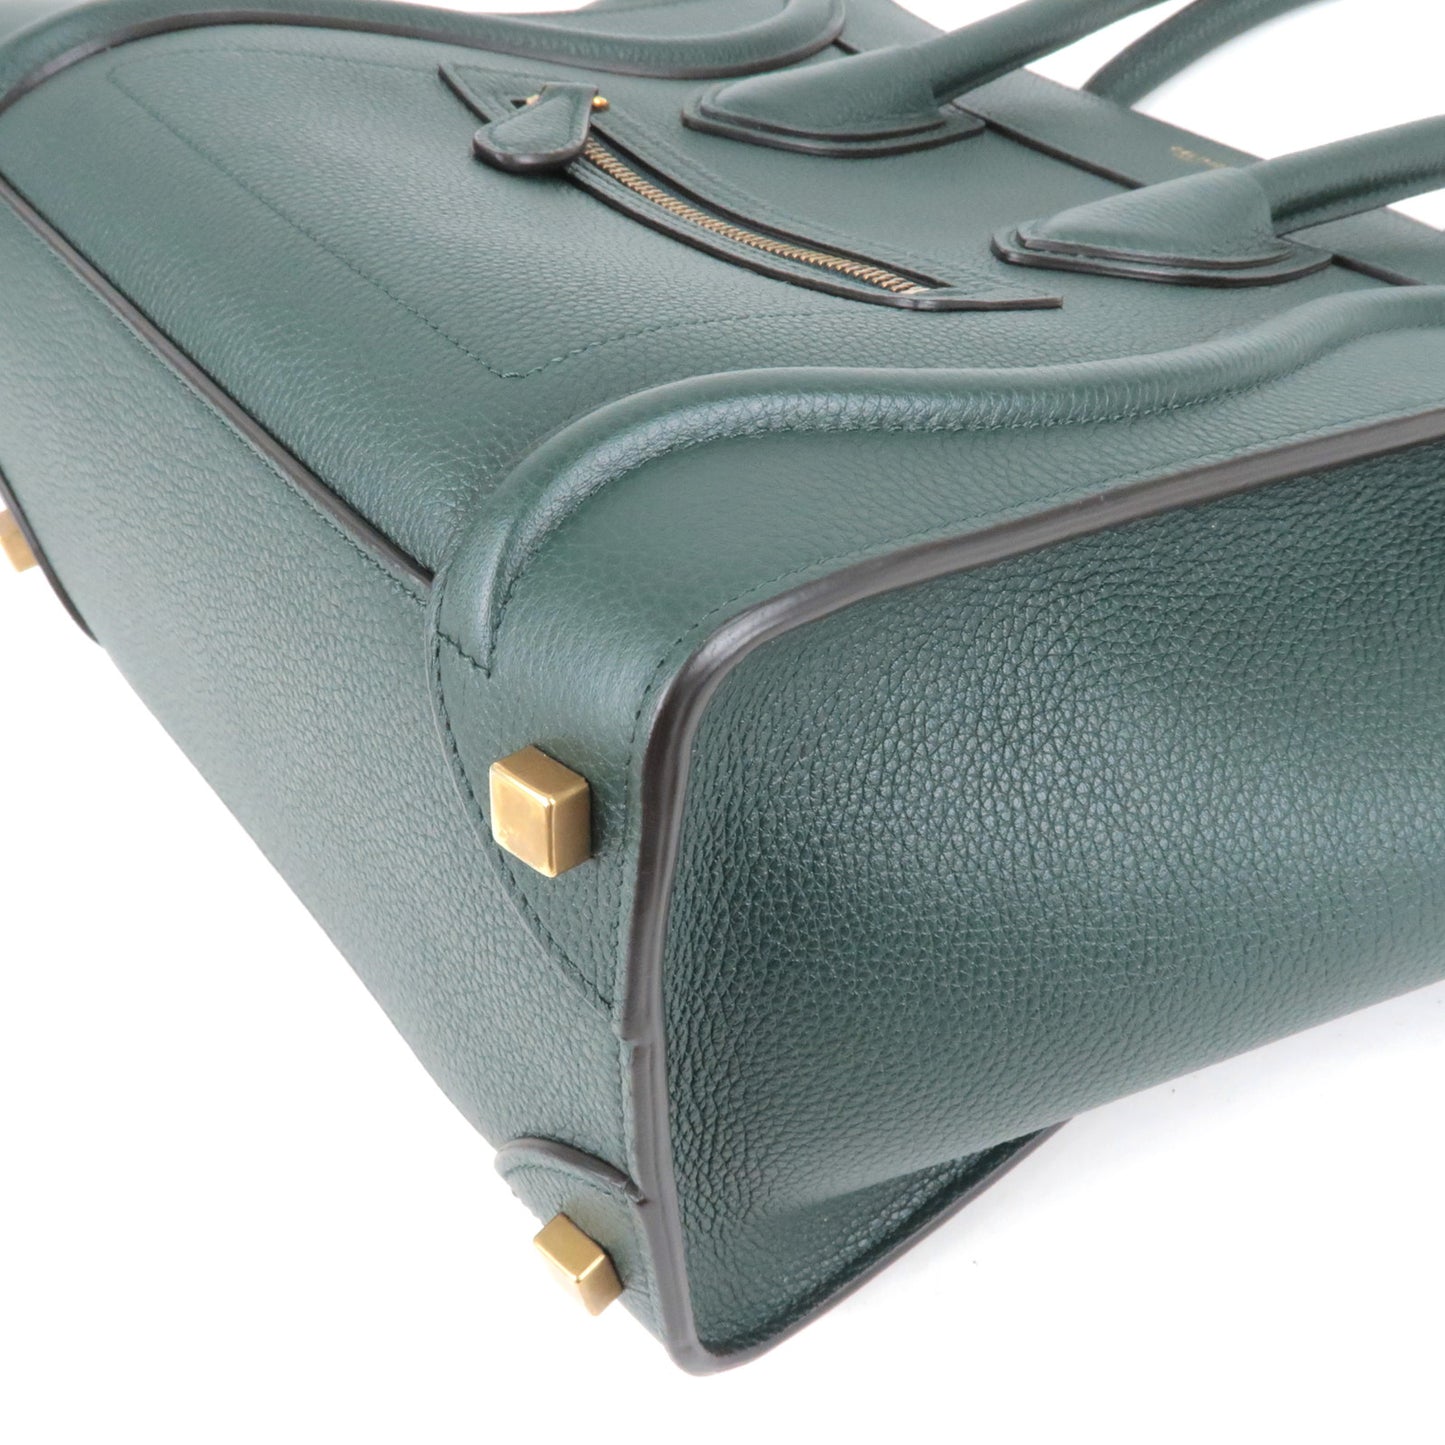 CELINE Luggage Micro Shopper Leather Hand Bag Green